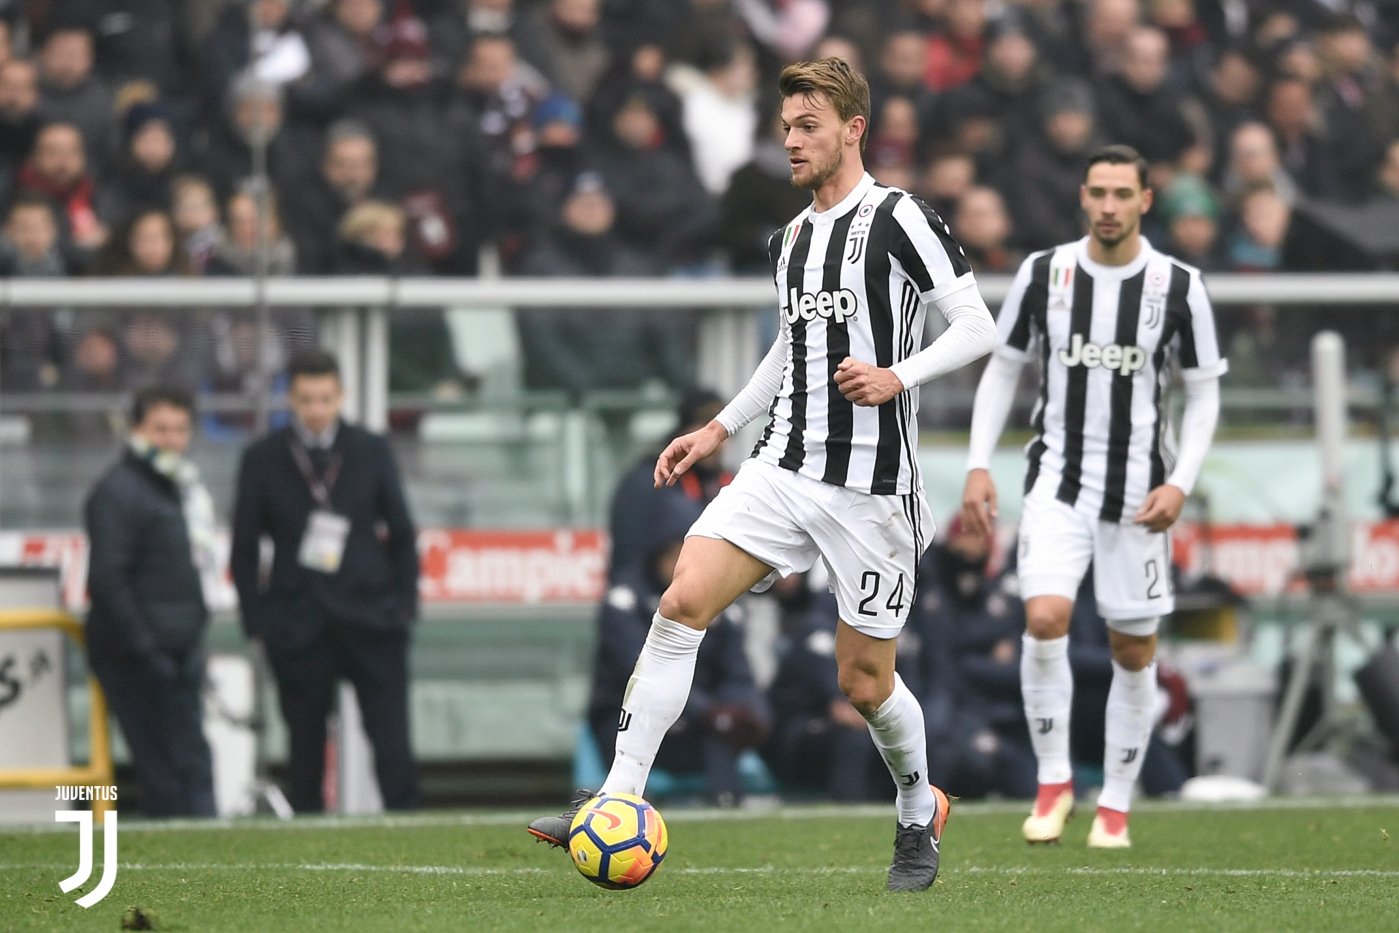 TURIN, ITALY - FEBRUARY 18:  Daniele Rugani of Juventus during the serie A match between Torino FC and Juventus at Stadio Olimpico di Torino on February 18, 2018 in Turin, Italy.  (Photo by Daniele Badolato - Juventus FC/Juventus FC via Getty Images )